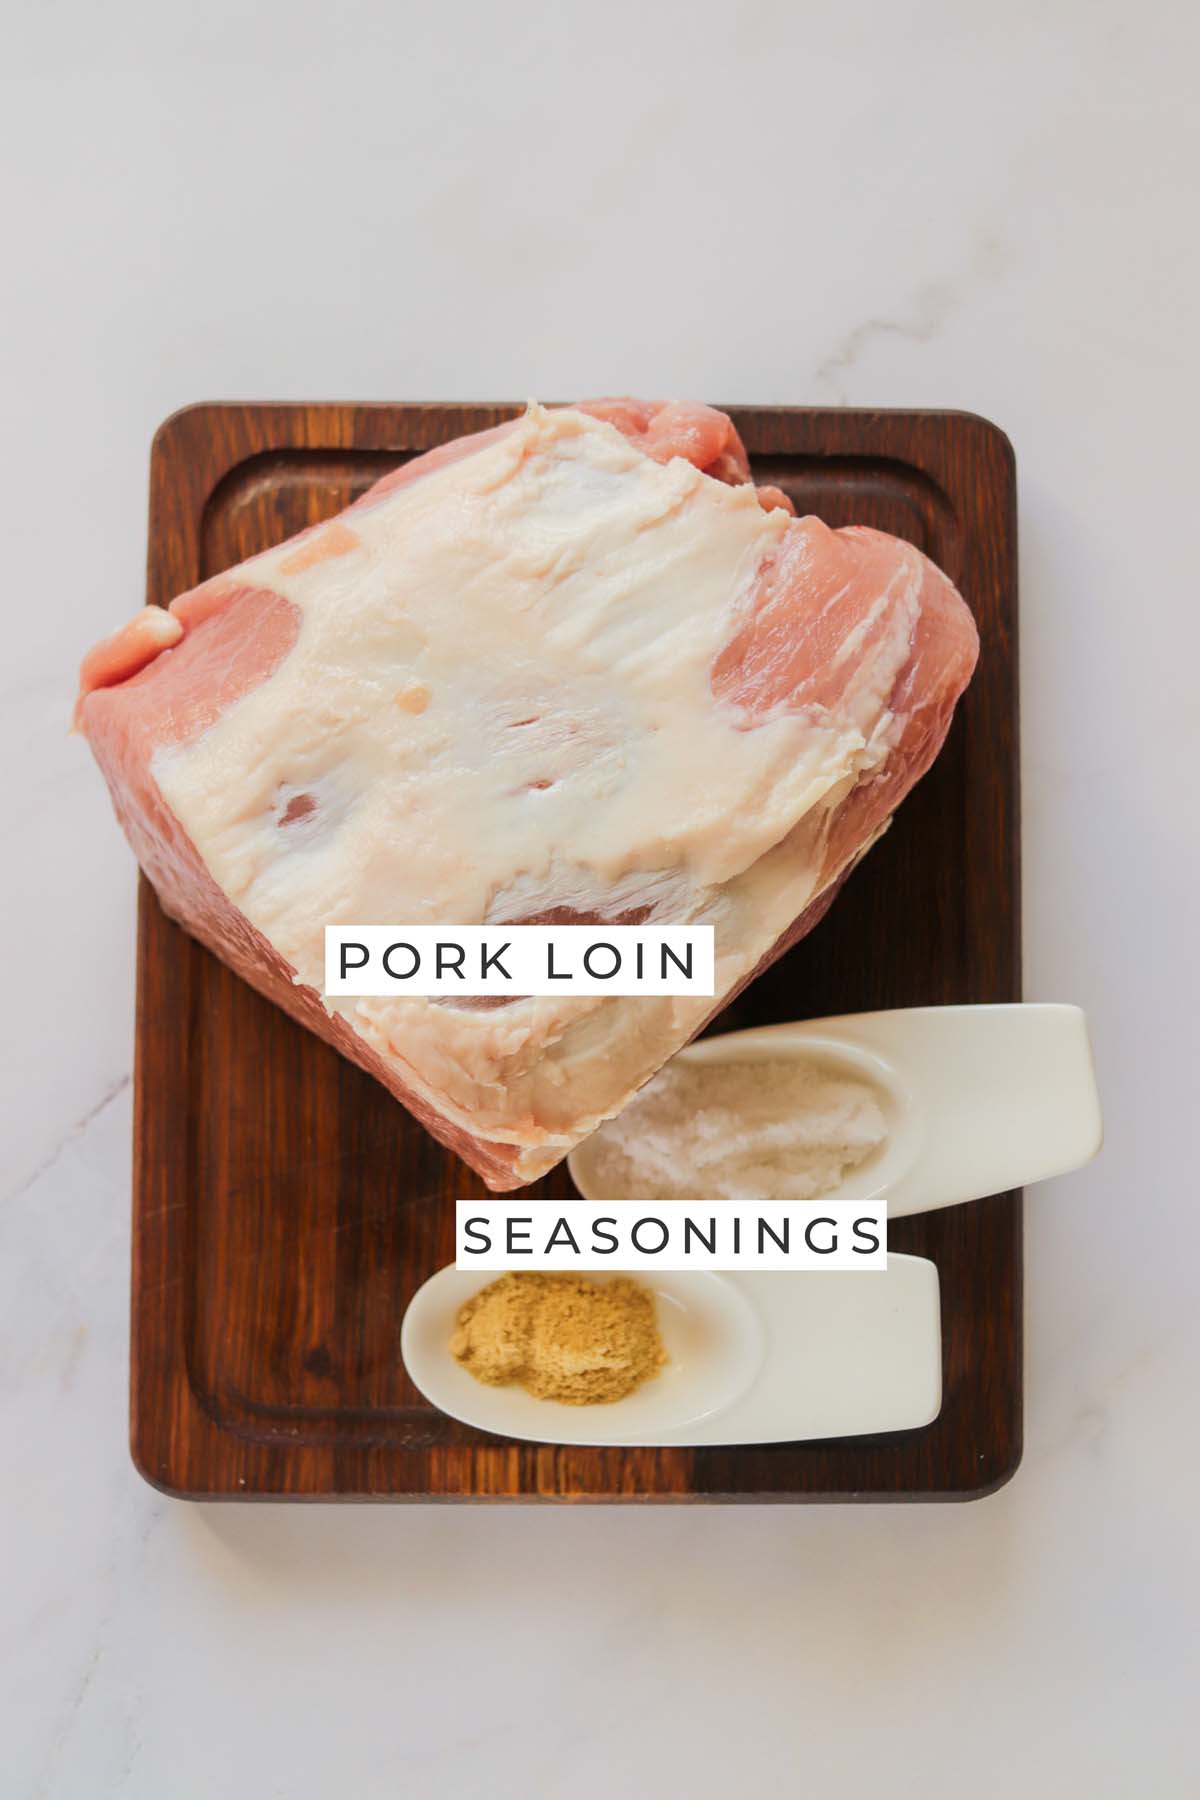 Labeled ingredients for the pork roast.